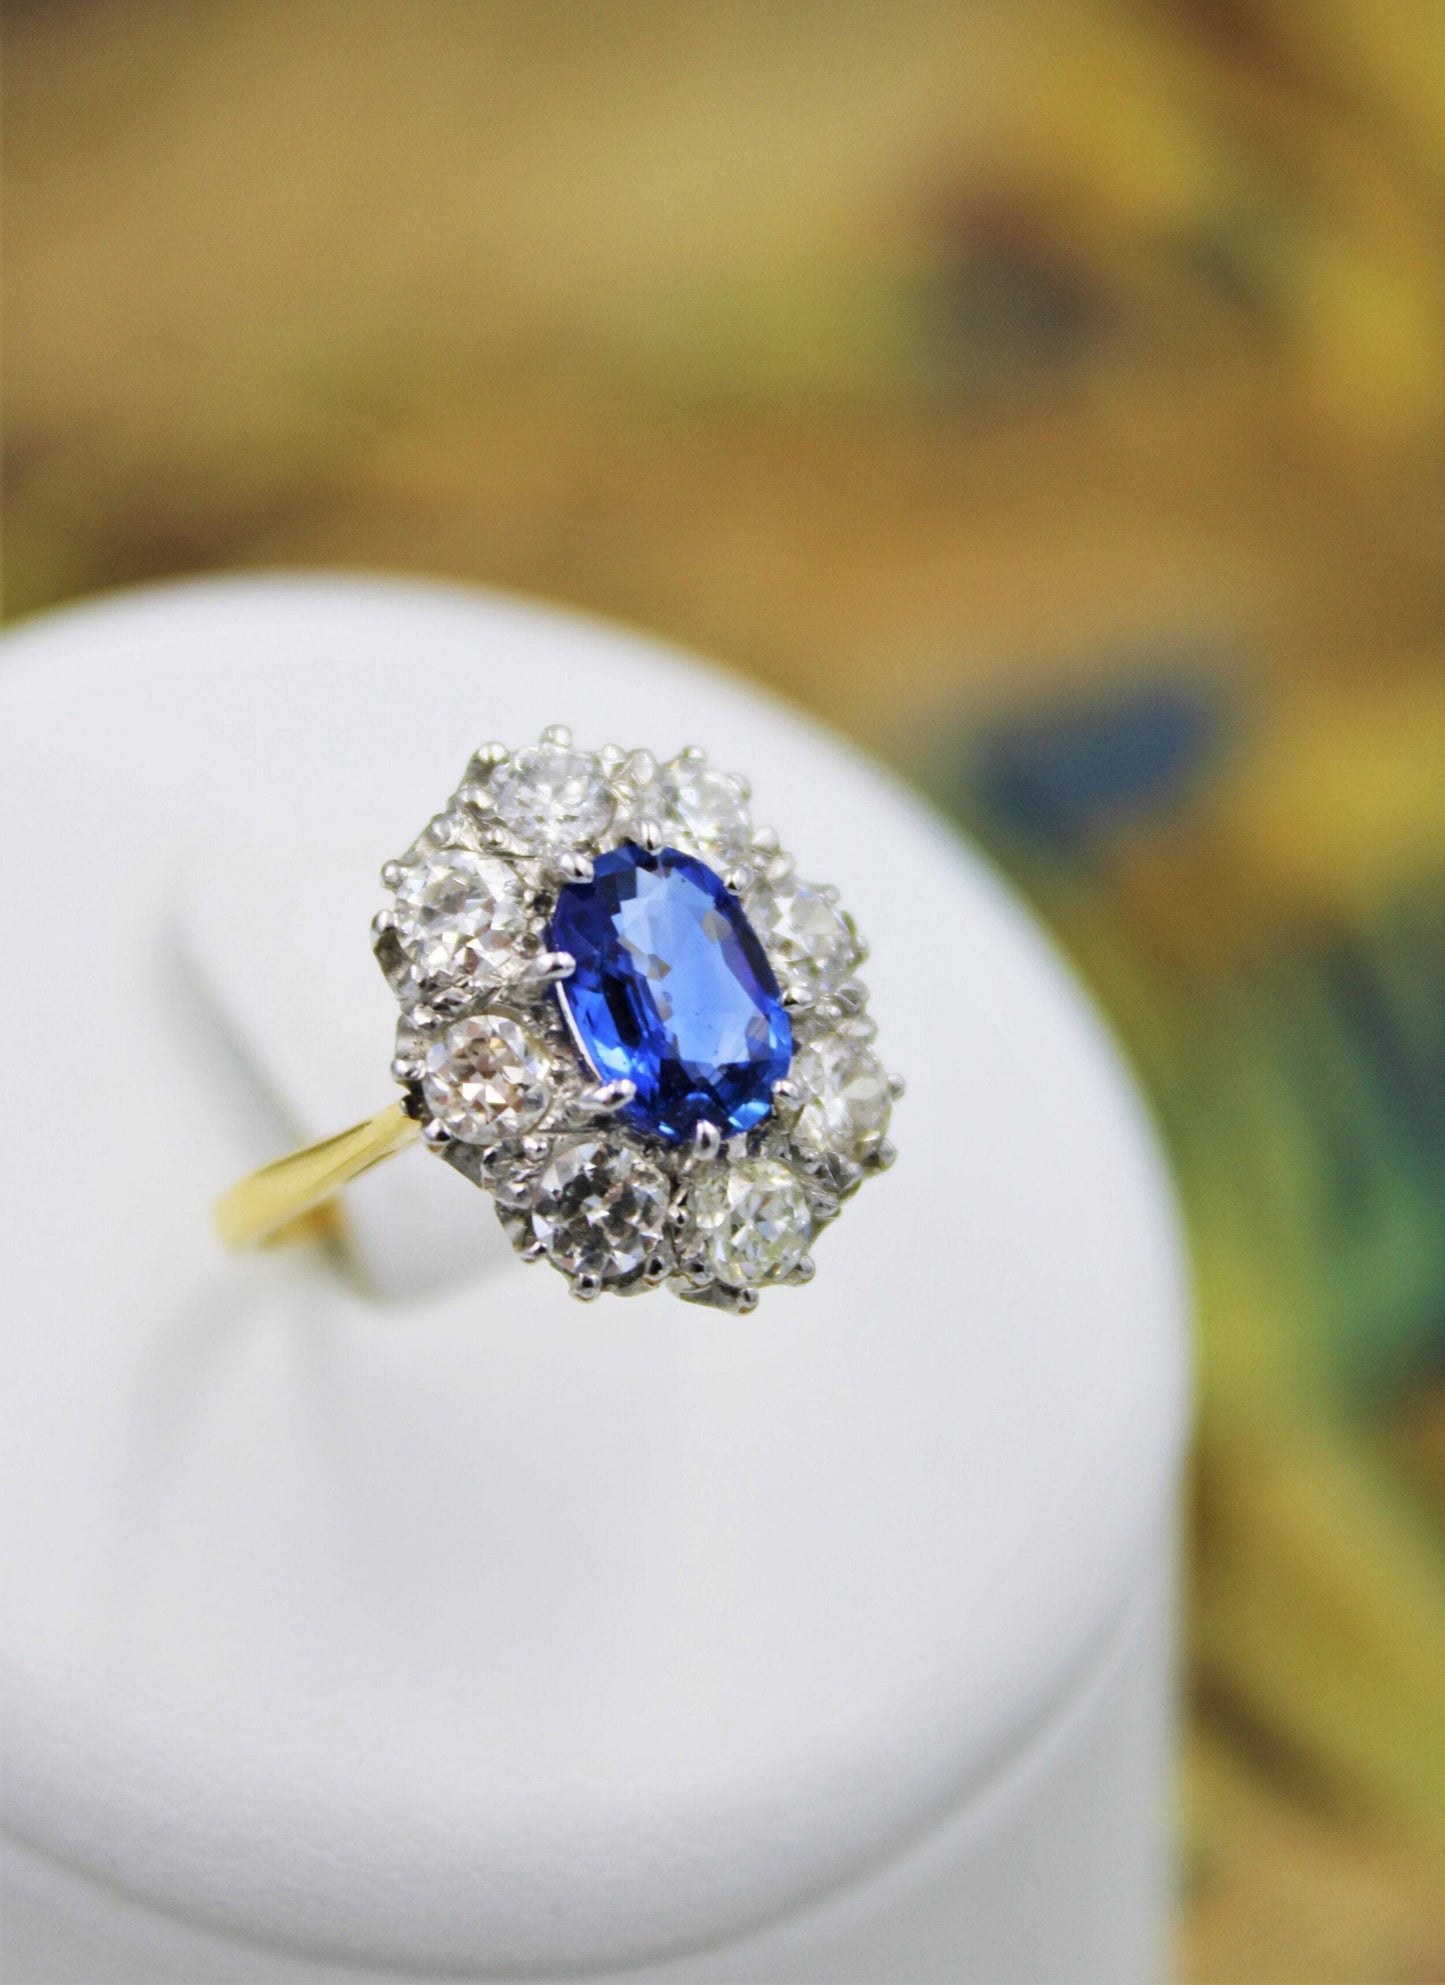 A fine 2.01ct Sapphire and Diamond Cluster Ring mounted in 18ct Yellow Gold & Platinum, Pre-owned - Robin Haydock Antiques